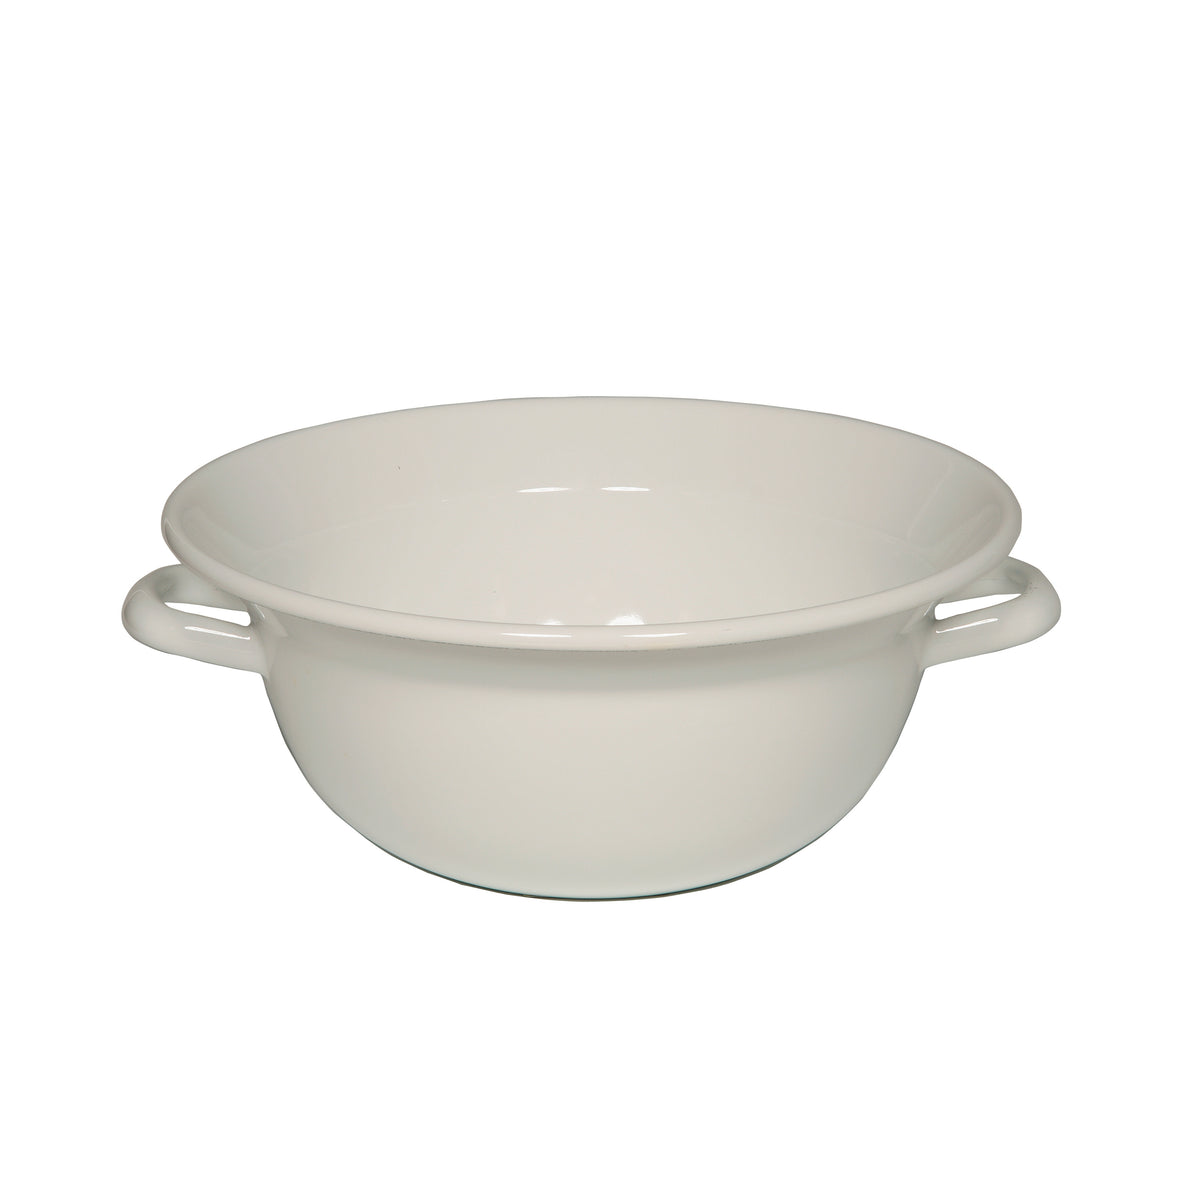 Medium bowl with two handles